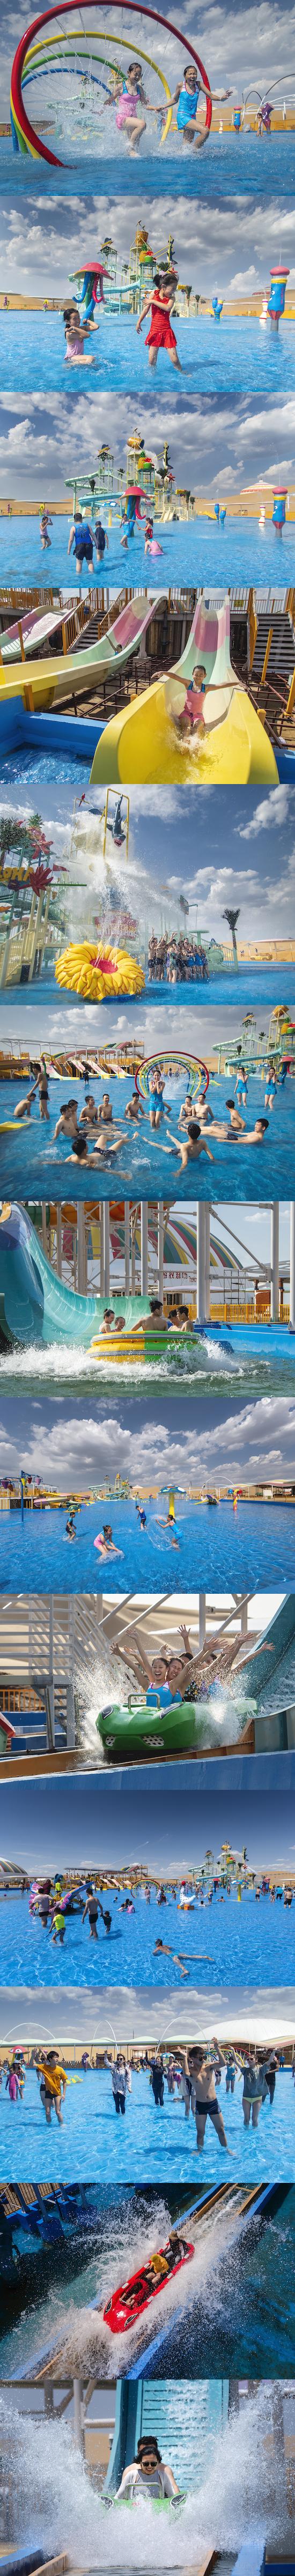 The worlds only water park in desert - opened to public in China this summer-Whistling Dune Bay water park 